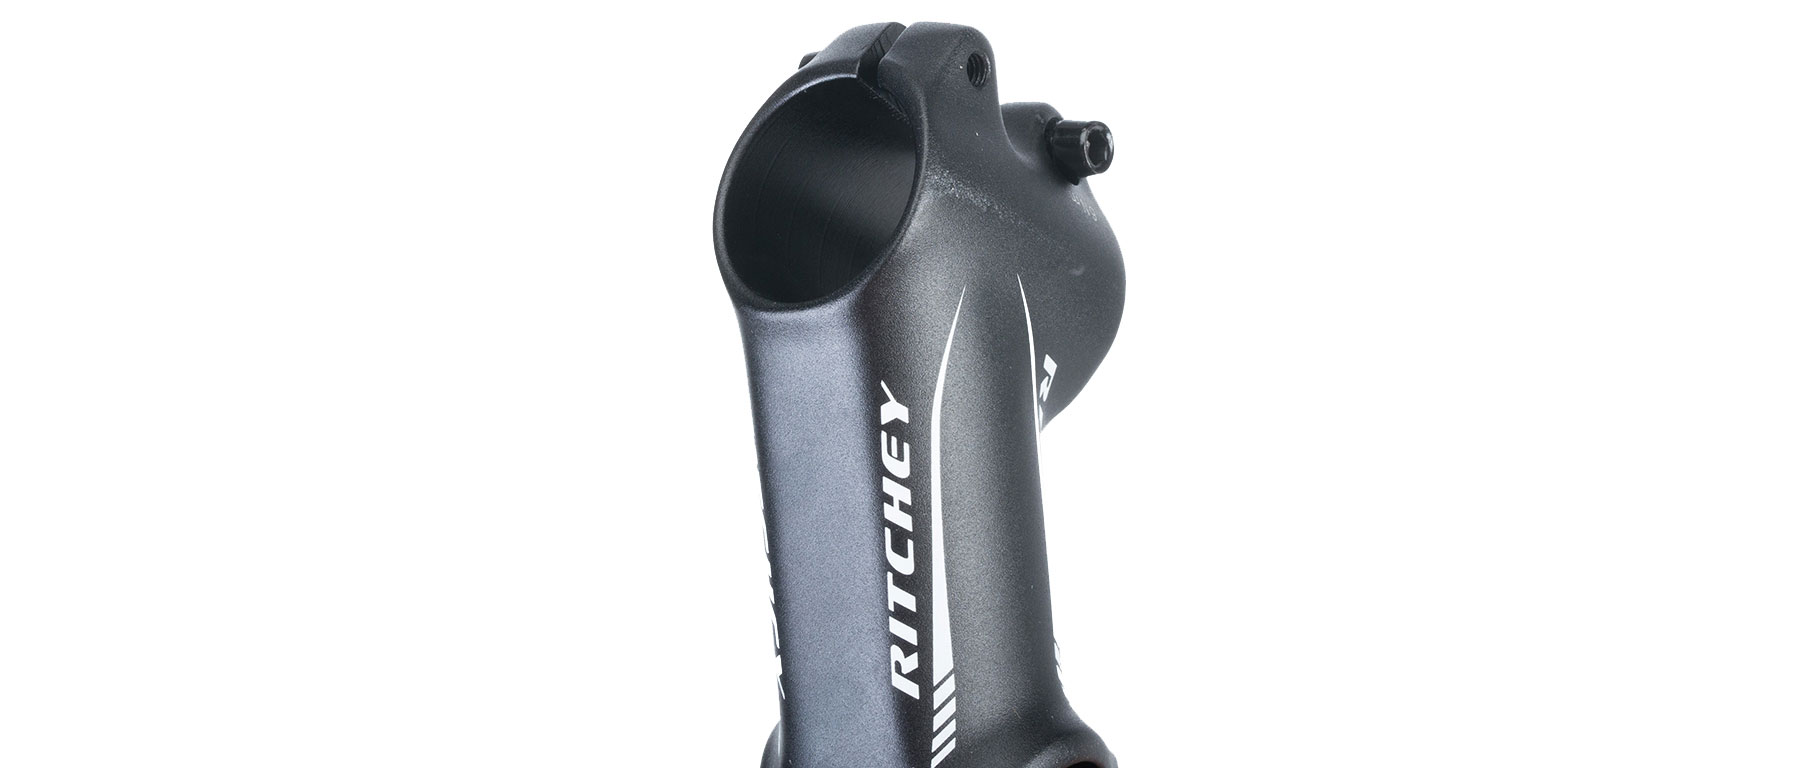 Ritchey Comp 4-Axis 30 Degree Stem